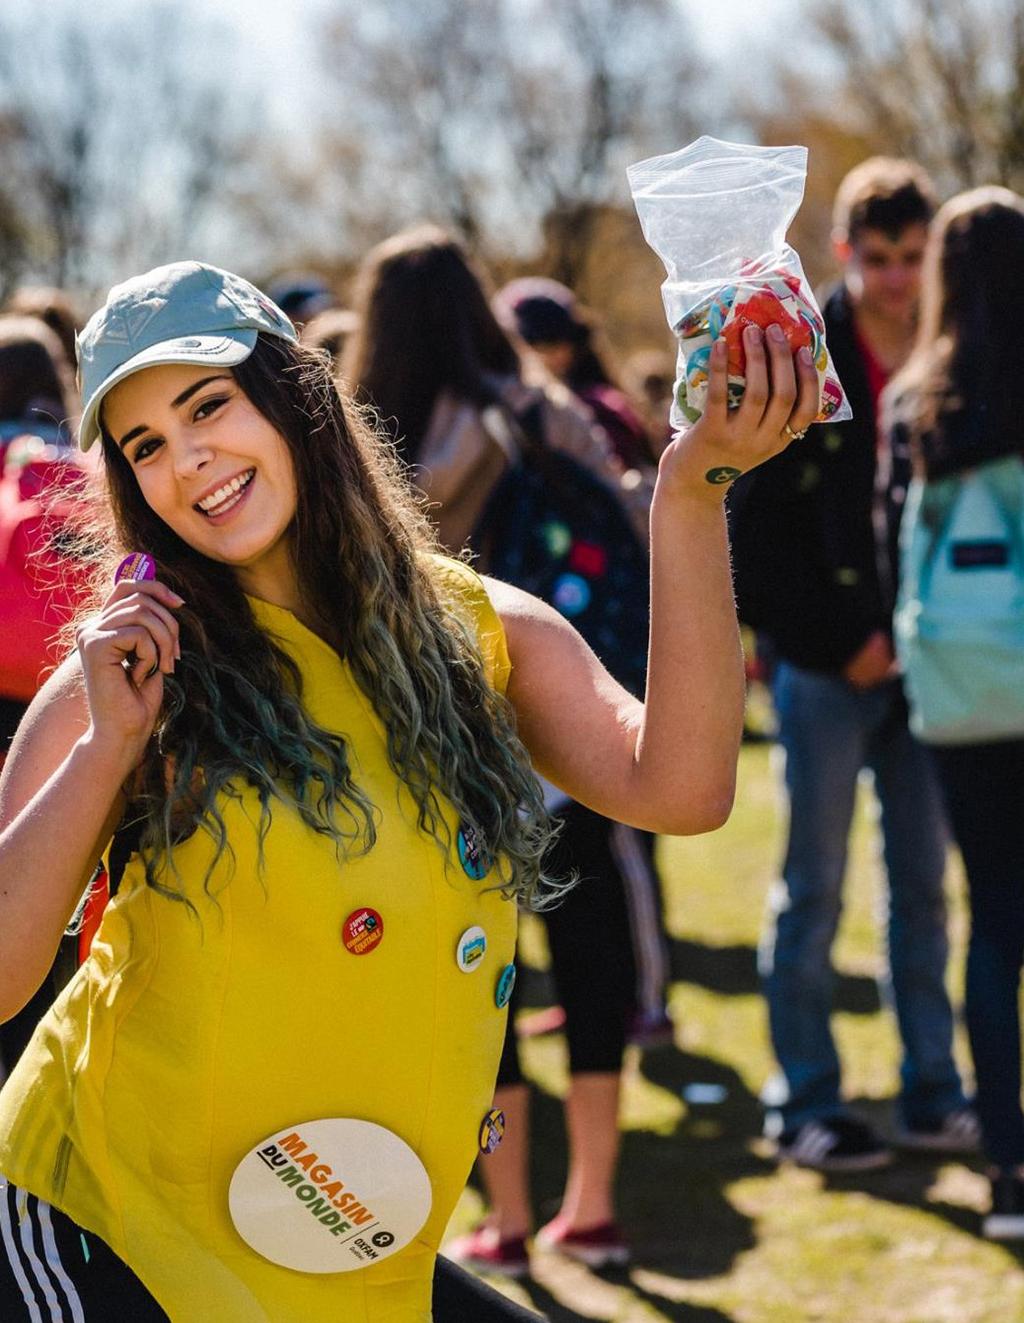 A FLASH MOB ON CAMPUS Want to catch the attention of students in the name of Fairtrade?